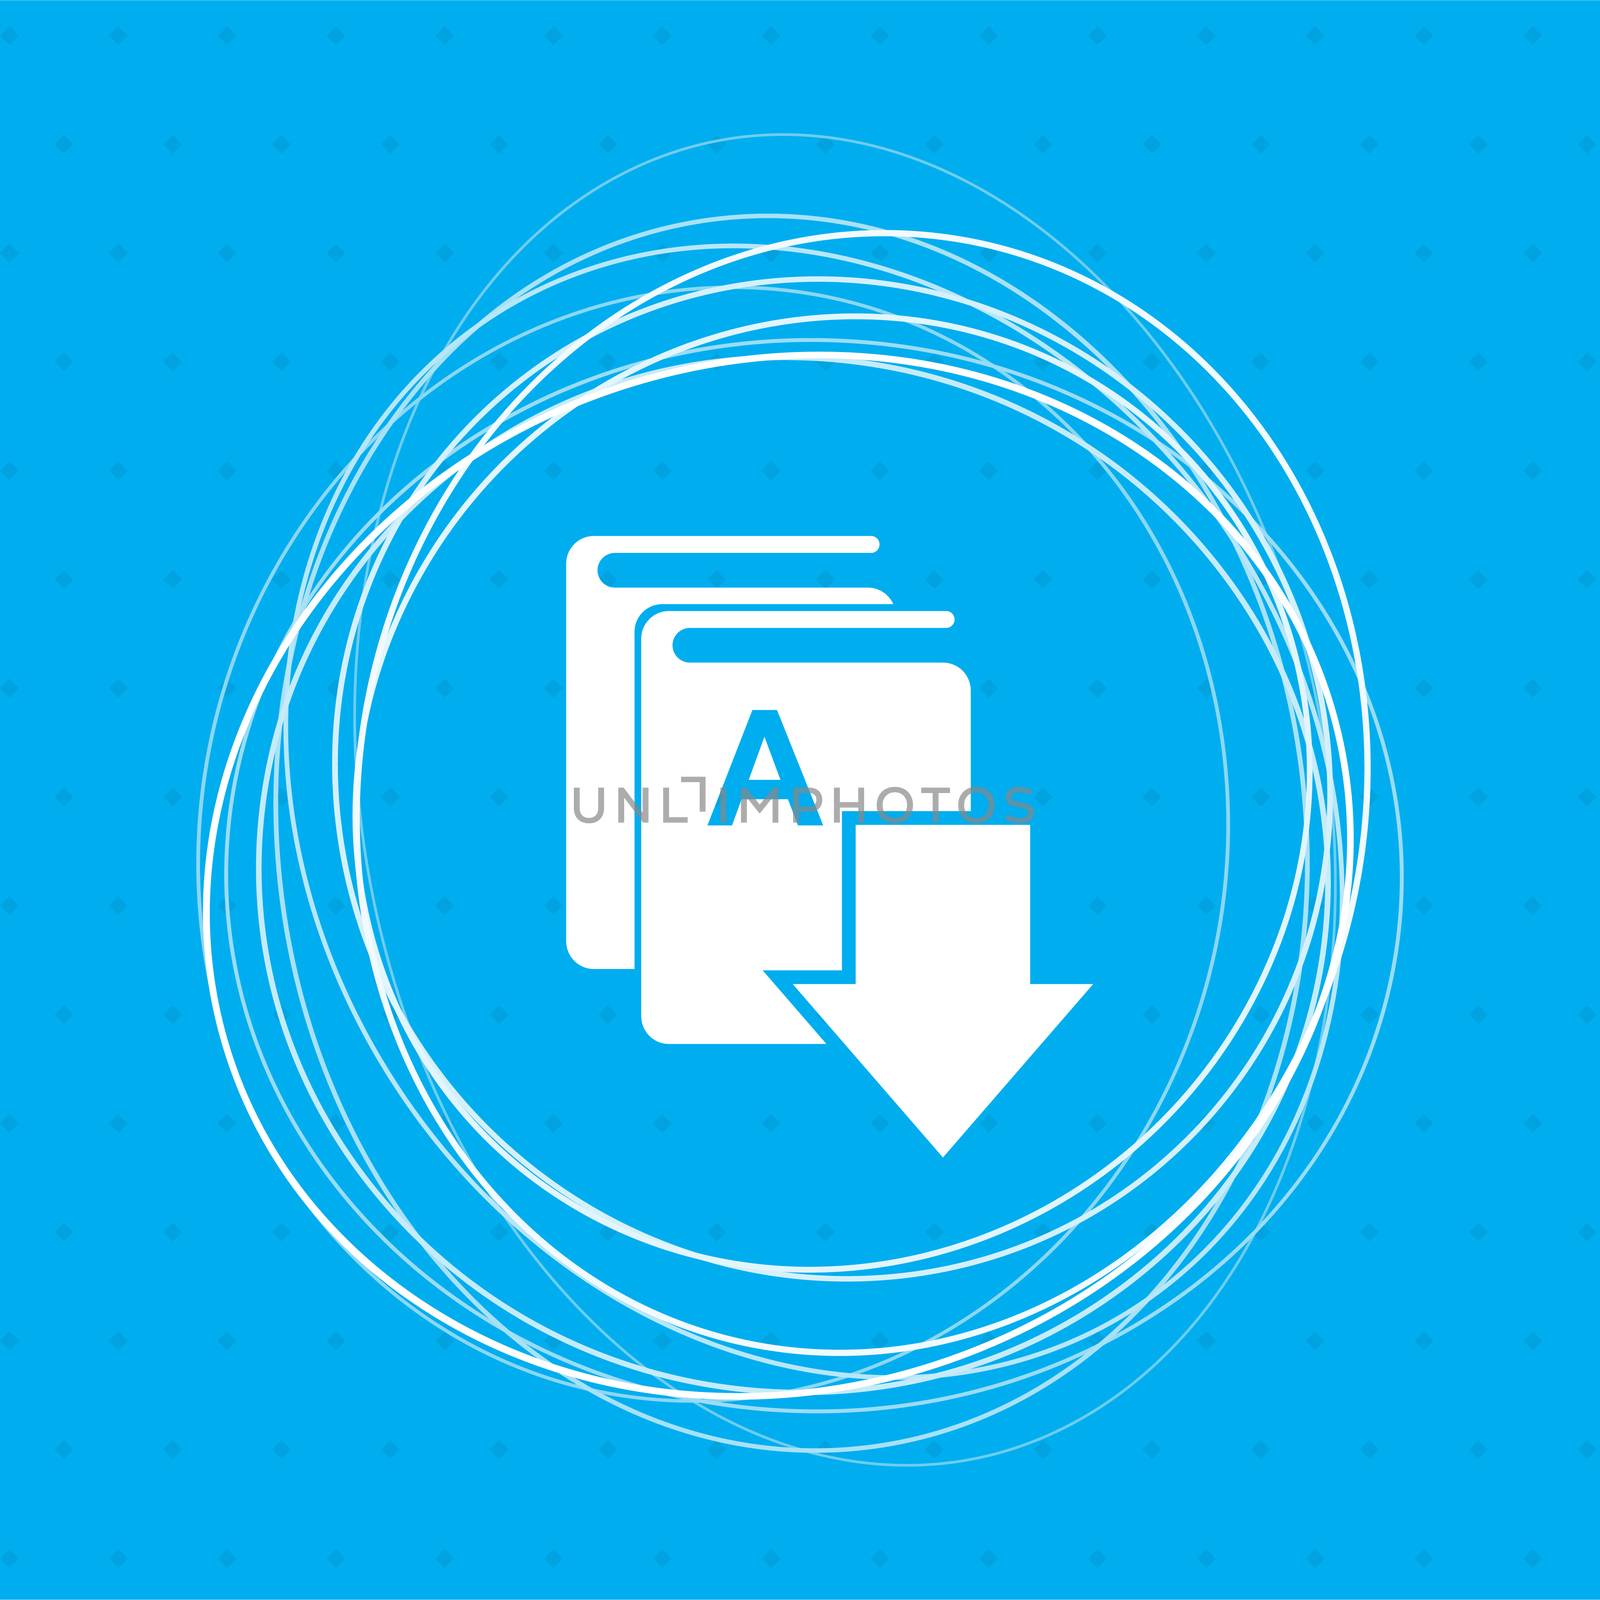 Book download, e-book icon on a blue background with abstract circles around and place for your text. illustration